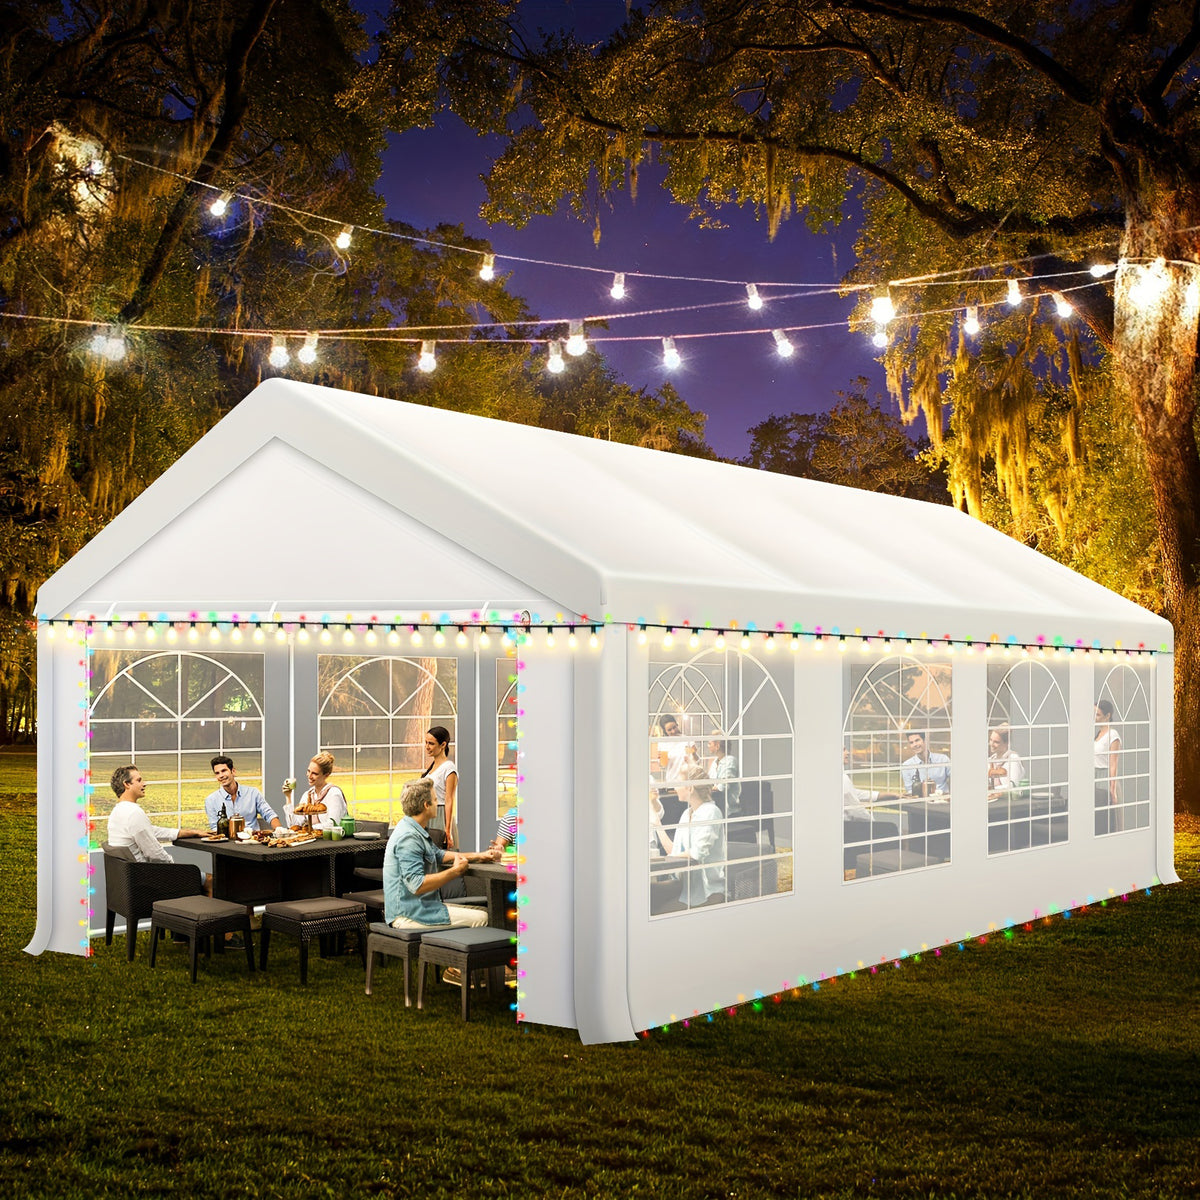 Hoteel 10'x20' Party Wedding Tent with 6 Sidewalls, Outdoor Heavy Duty Canopy Patio Gazebo Pavilion, Waterproof, UV 50+, Cater Events for Party, Wedding, Camping, Birthday and BBQ, White